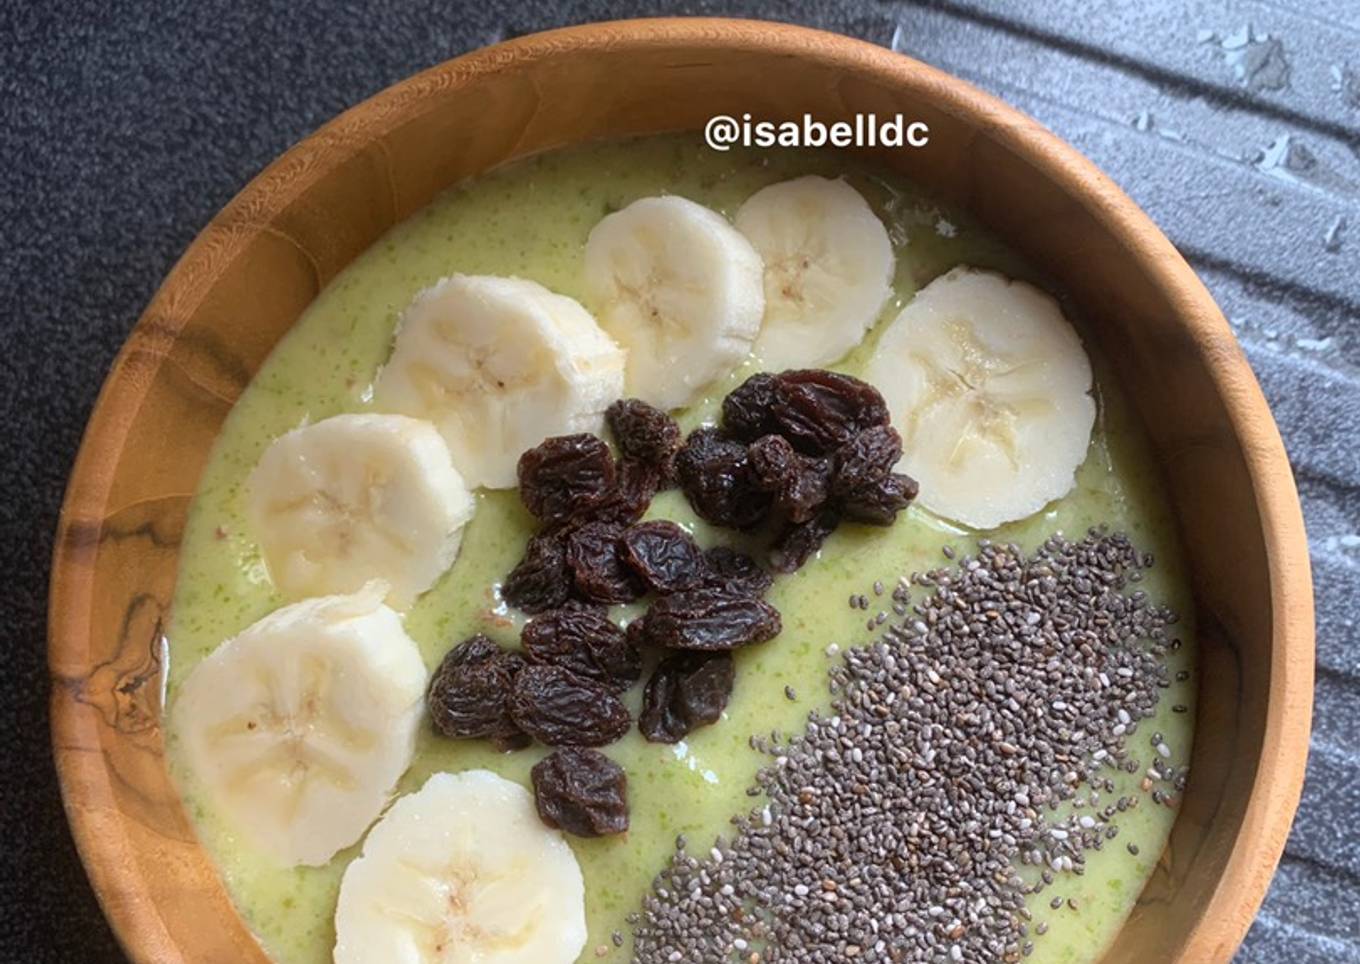 131. The Green Smoothie Bowl